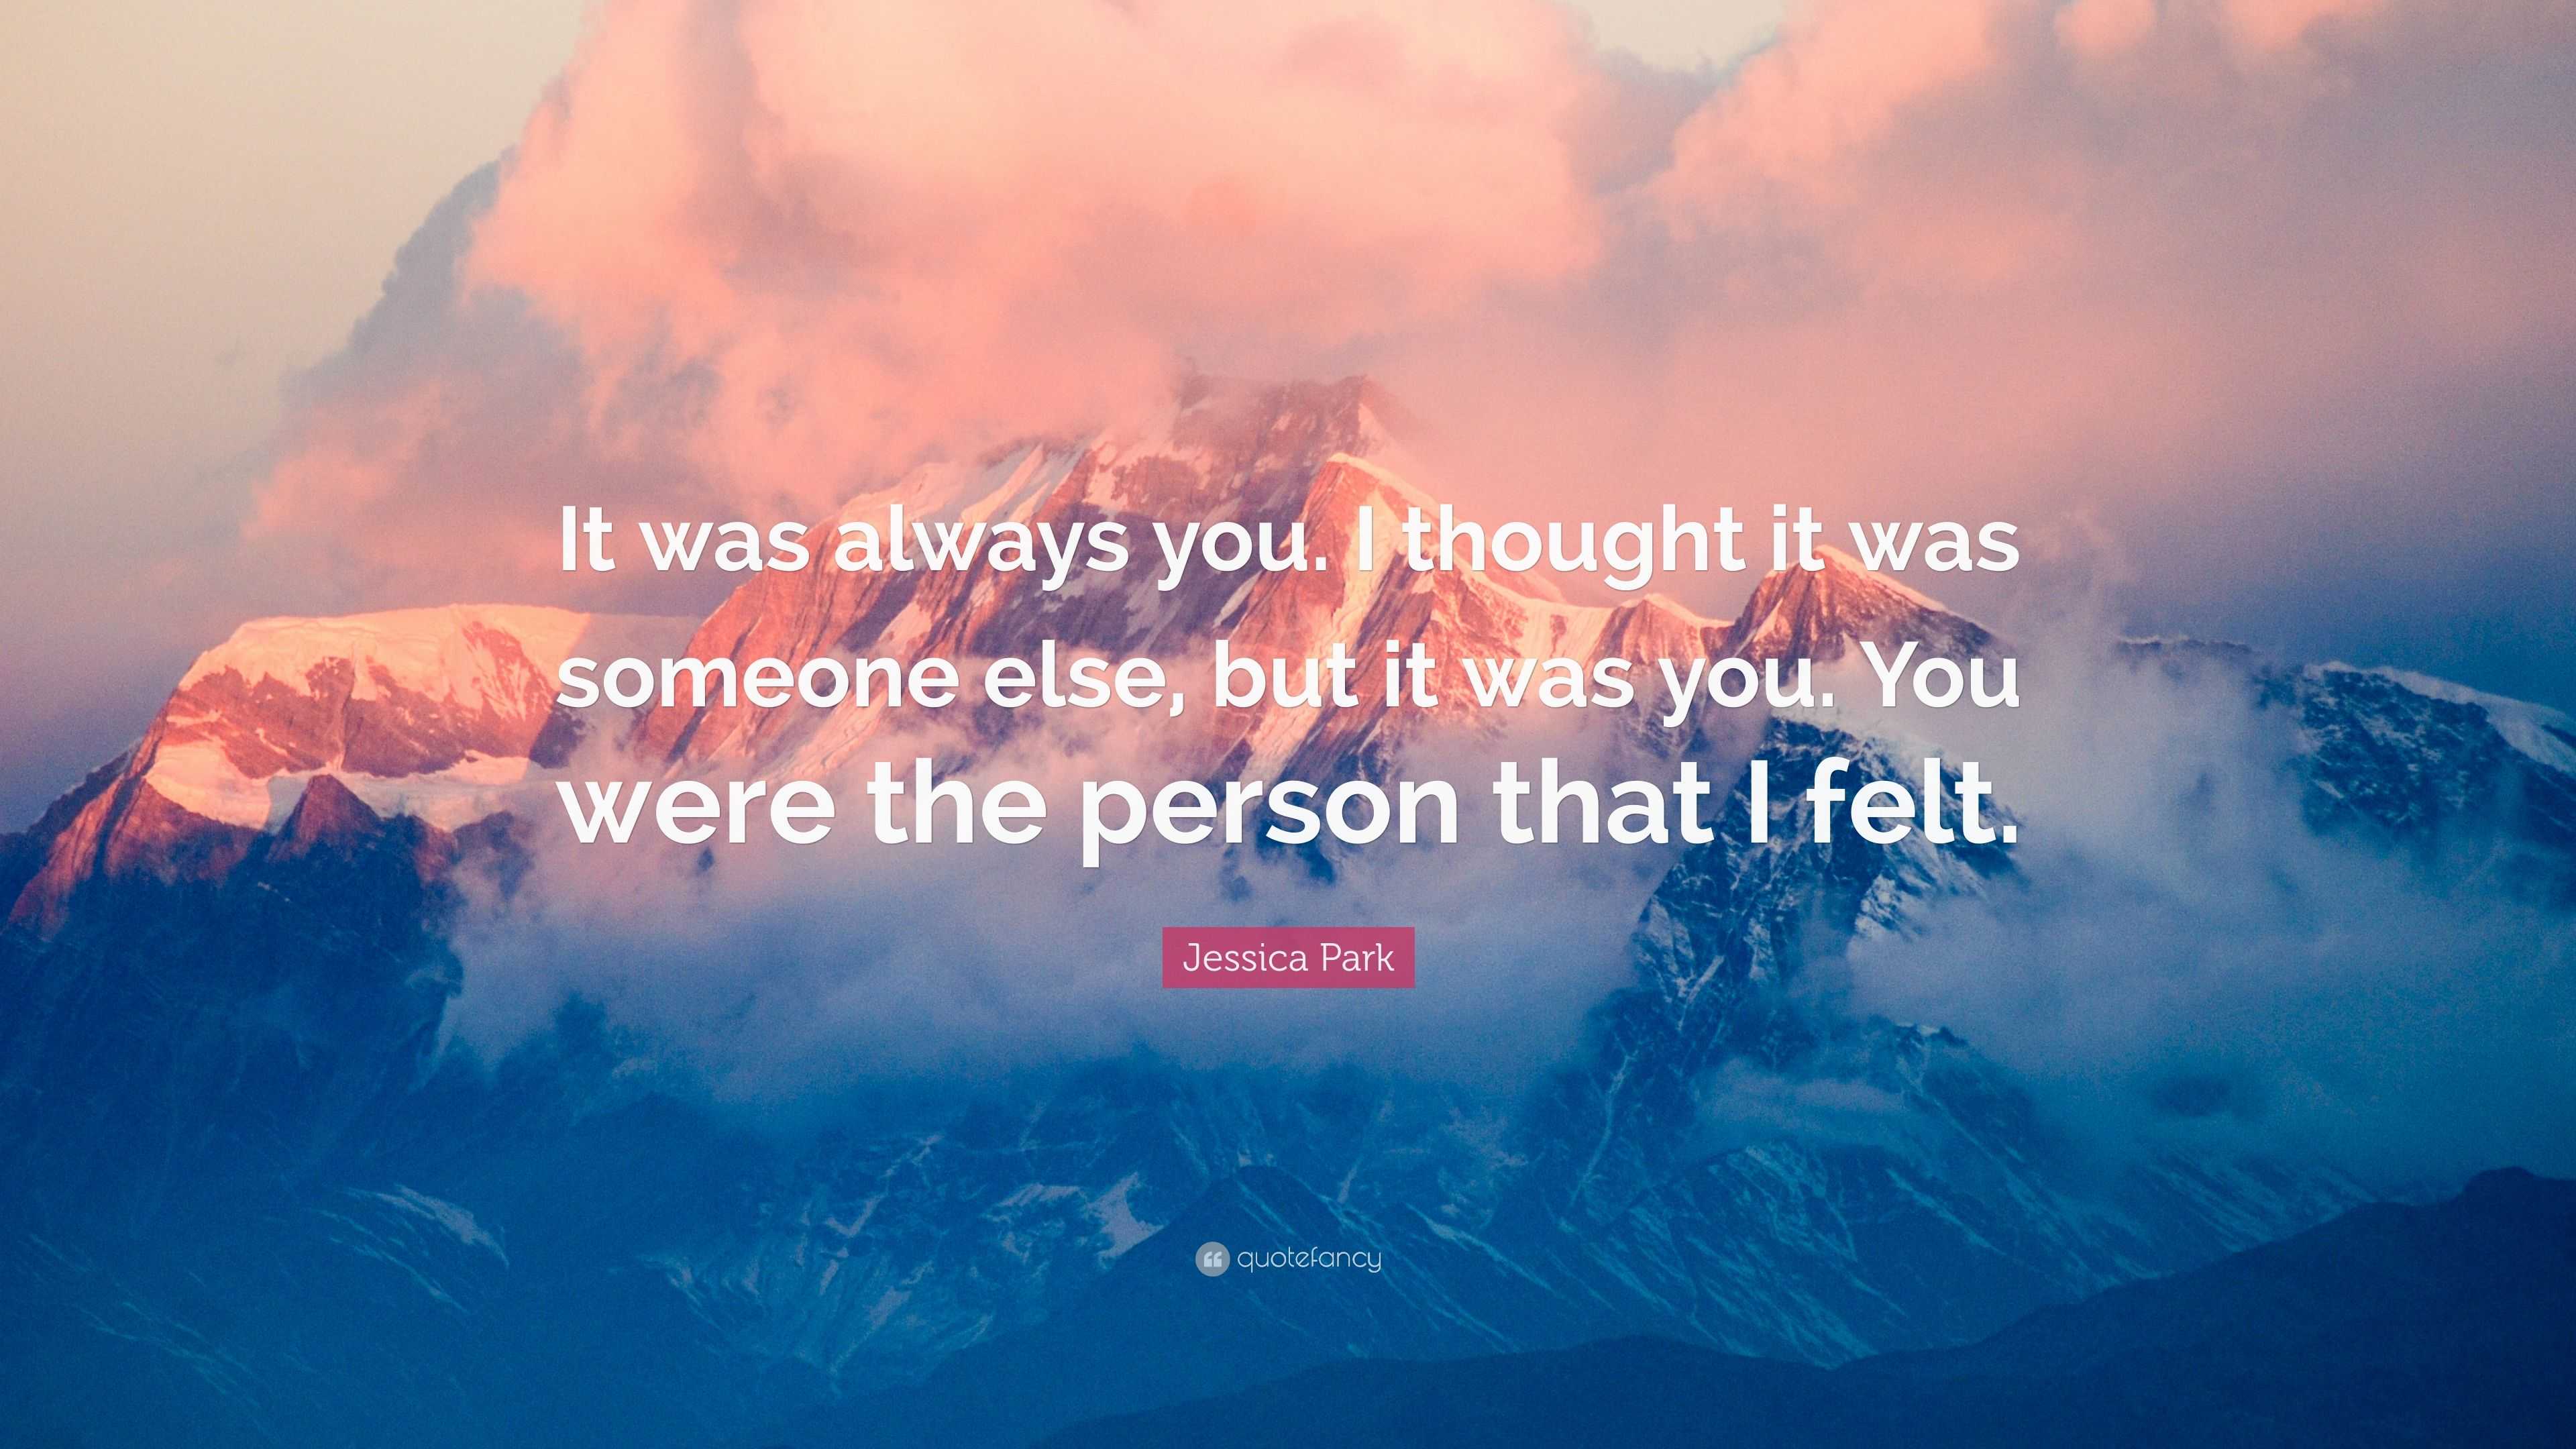 Jessica Park Quote: “It Was Always You. I Thought It Was Someone Else, But It Was